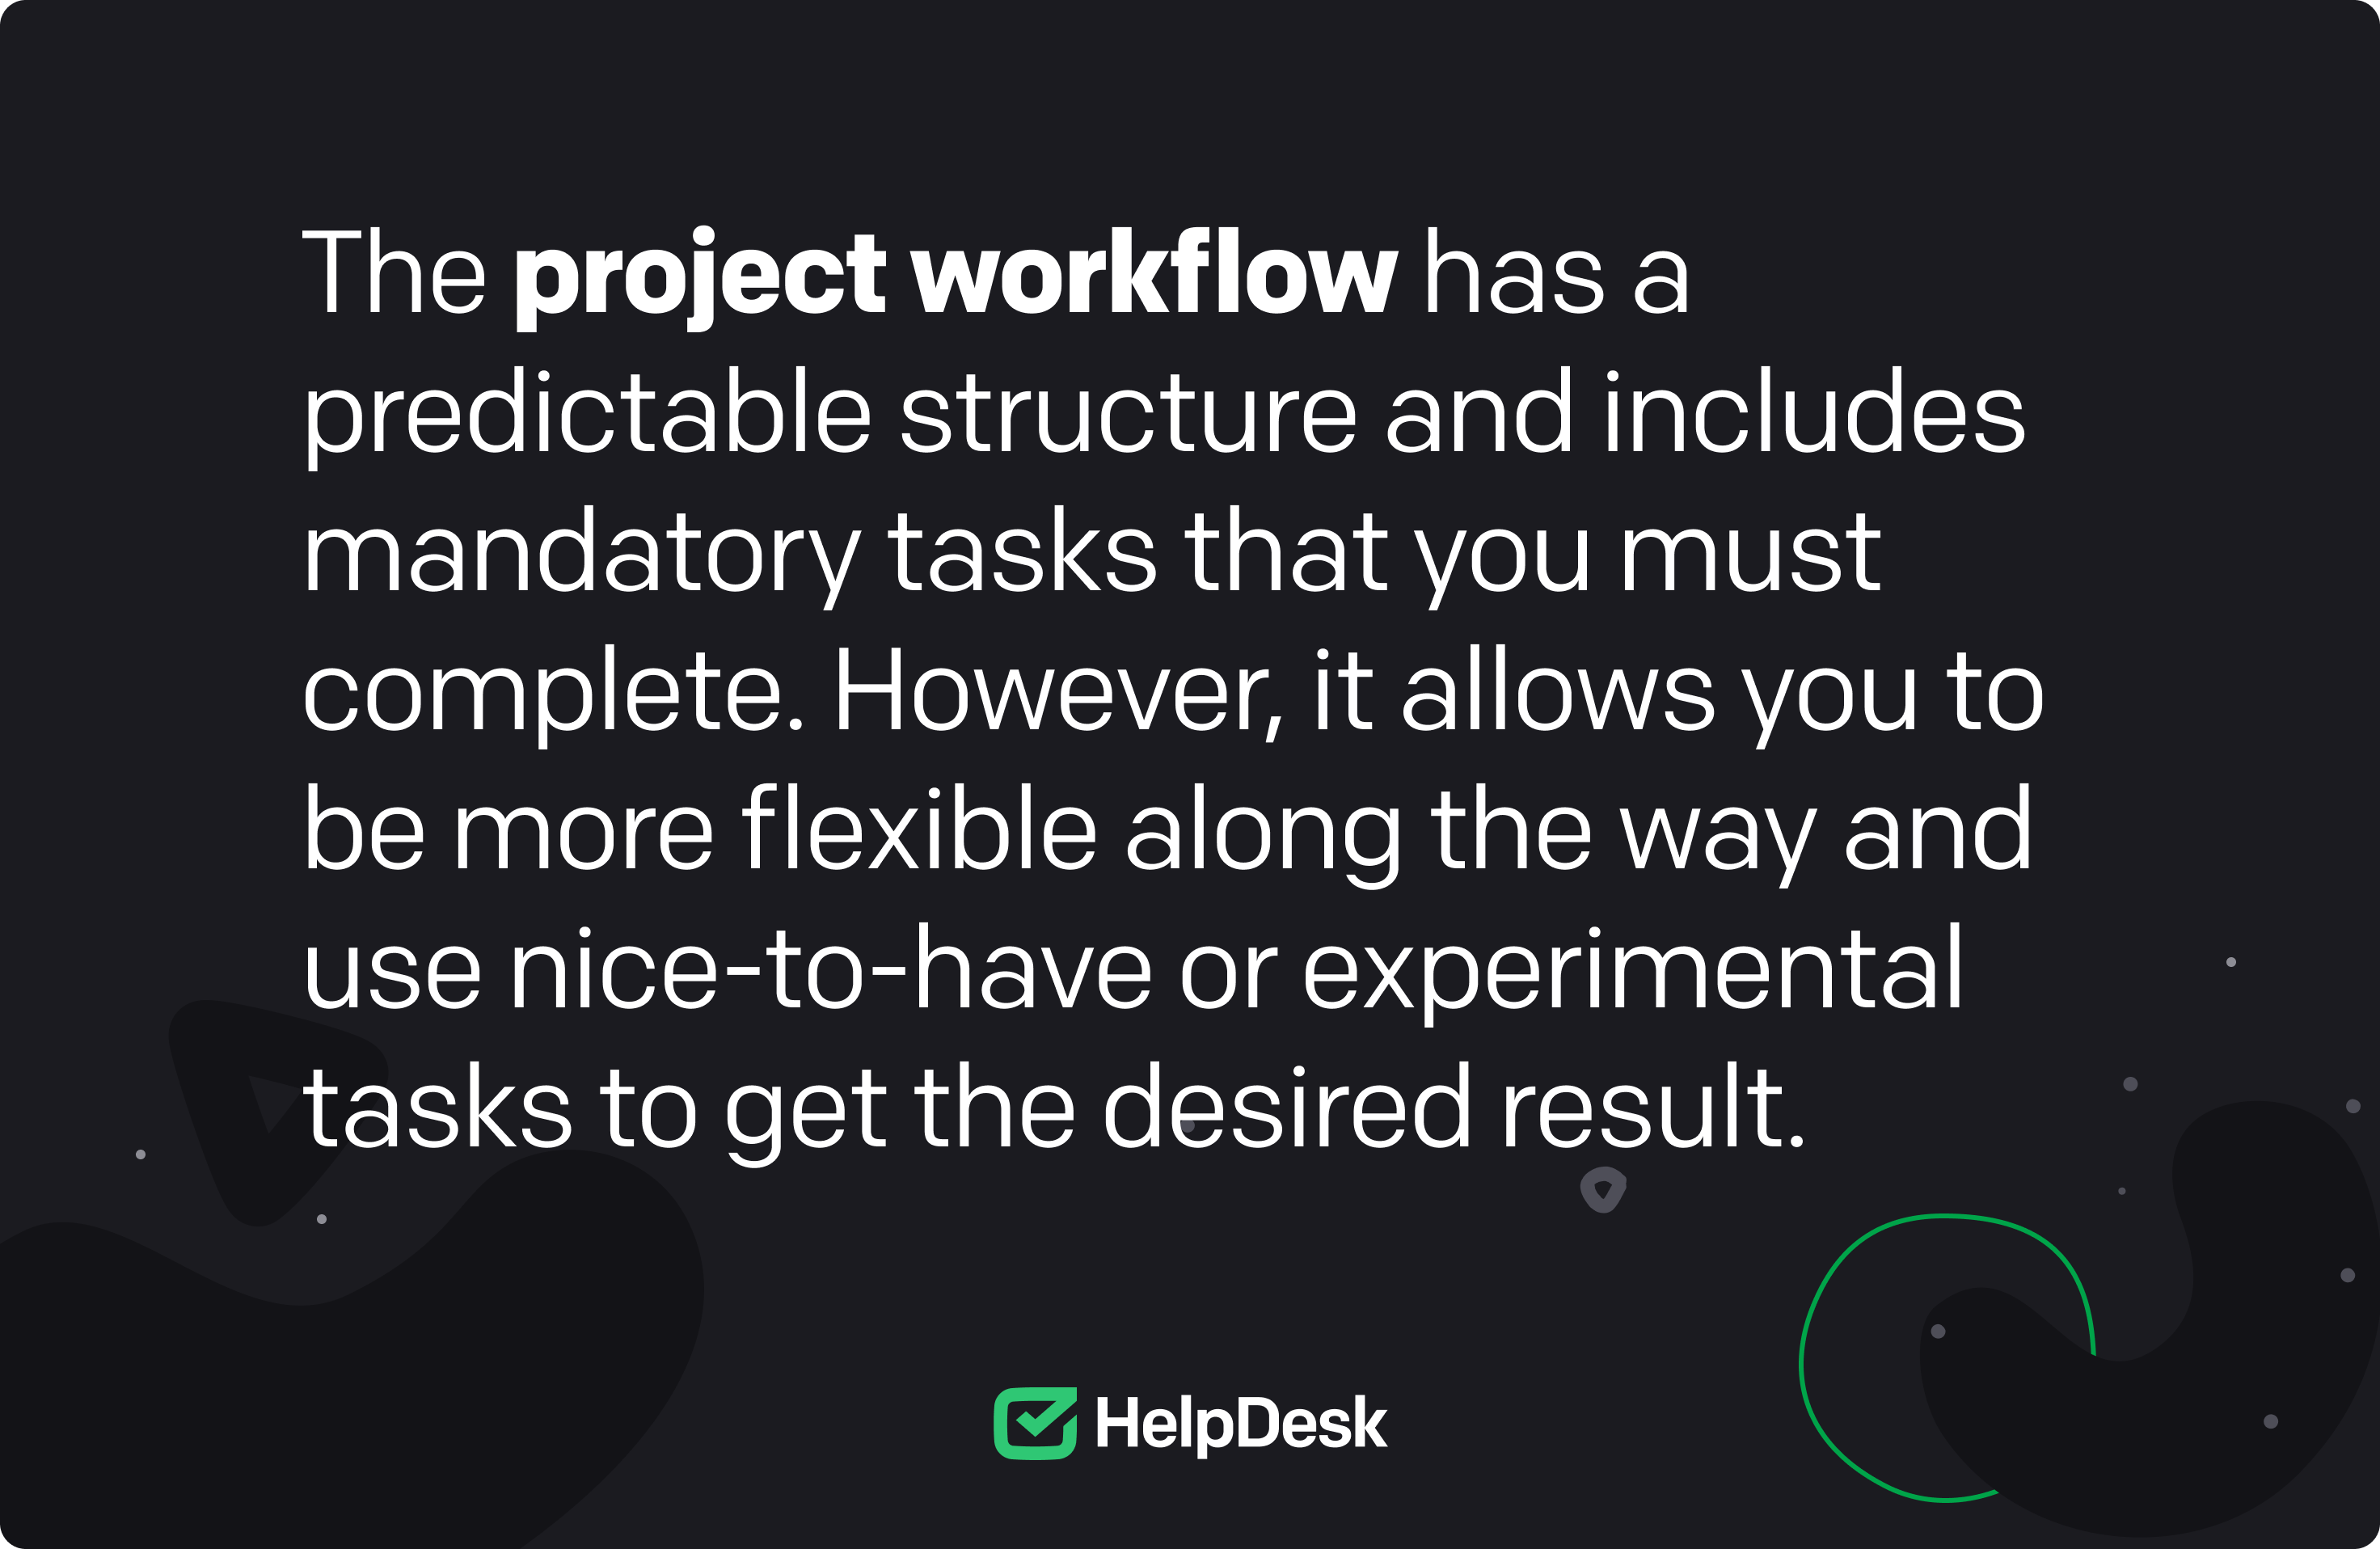 A definition of the project workflow.